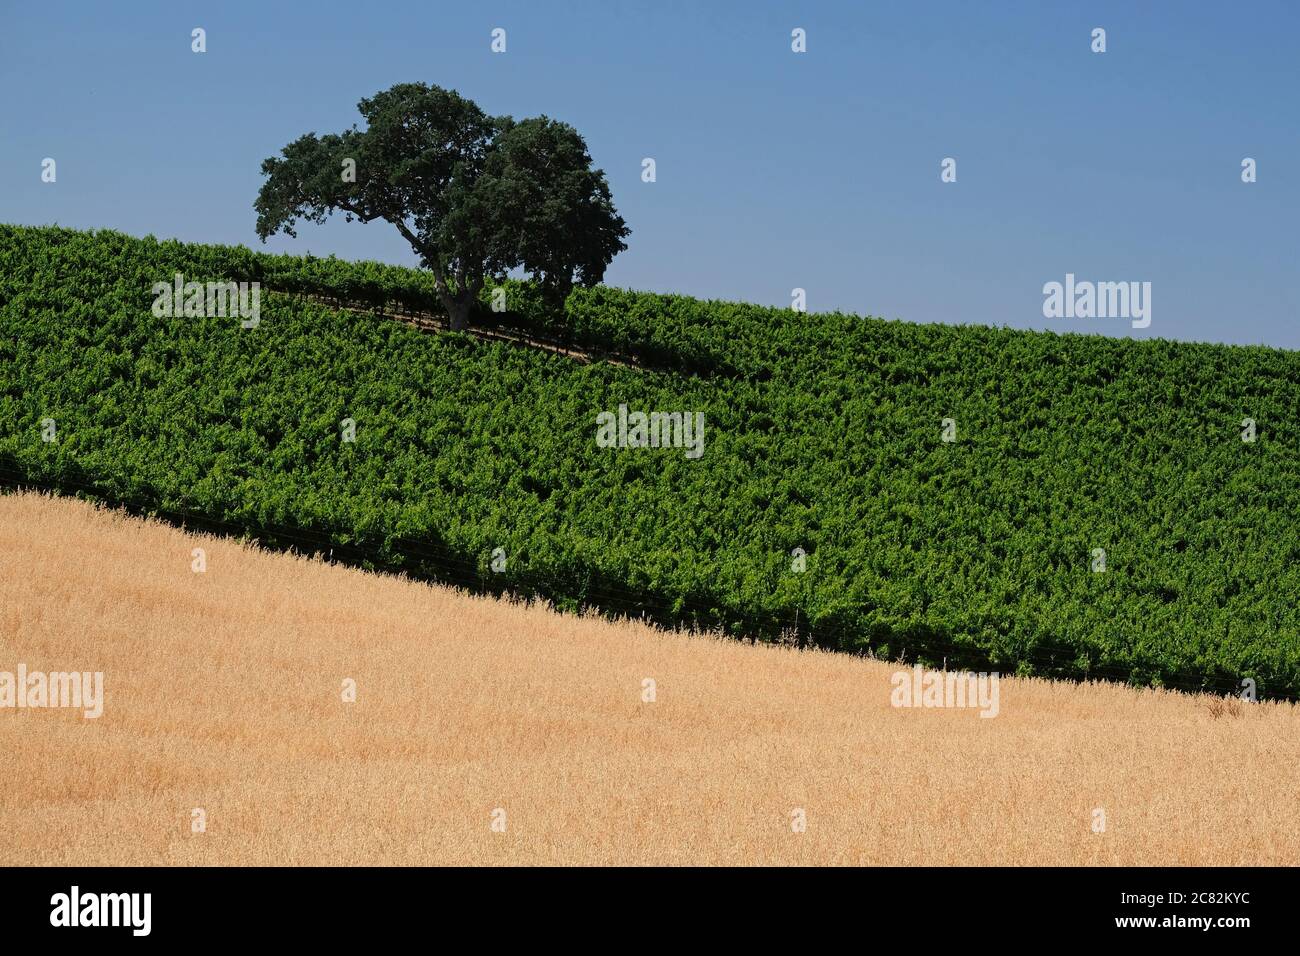 two tones of green vines and brown grass with a single oak tree in a Paso Robles vineyard Stock Photo